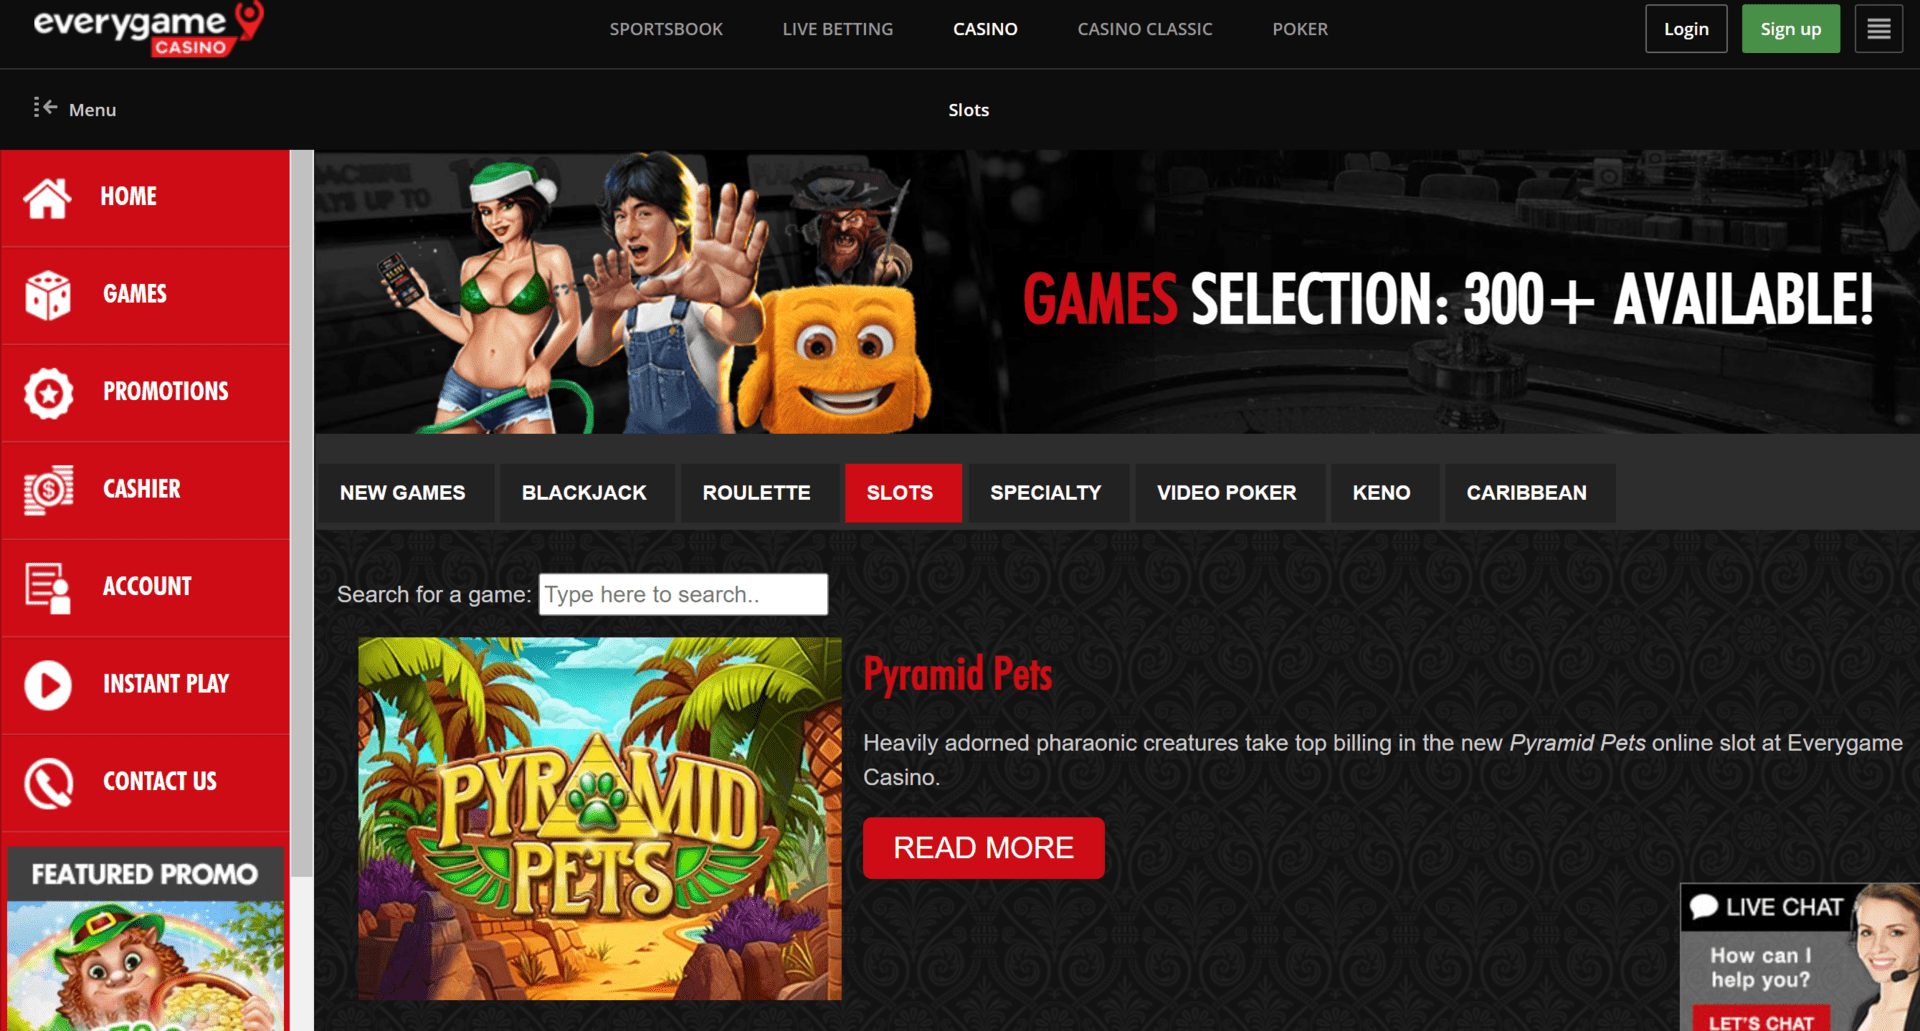 Everygame Casino Slots Site with 300+ Games